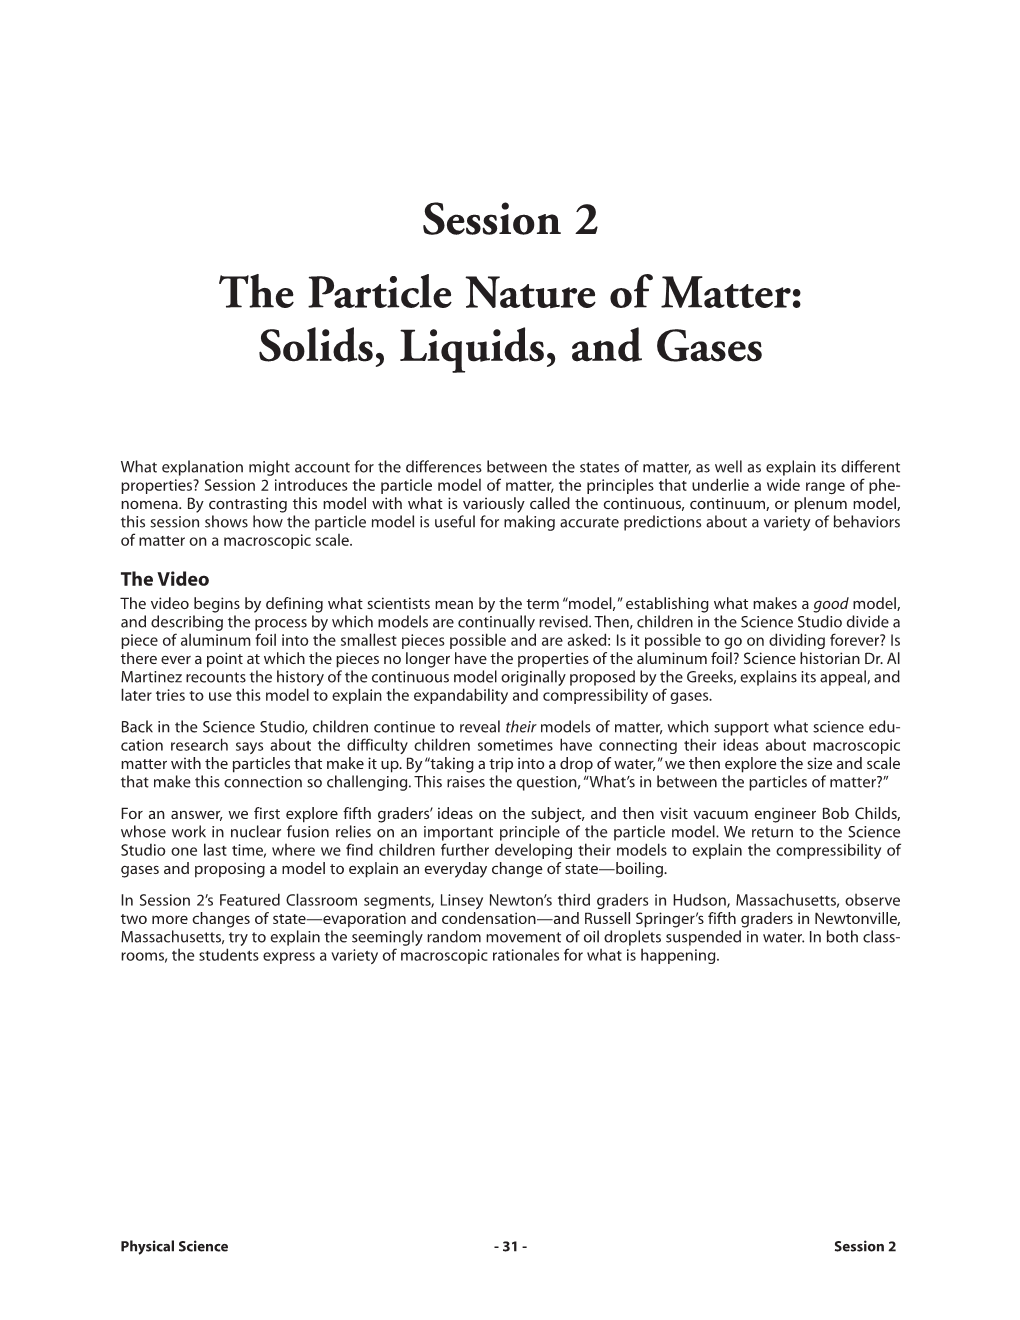 Session 2 the Particle Nature of Matter: Solids, Liquids, and Gases